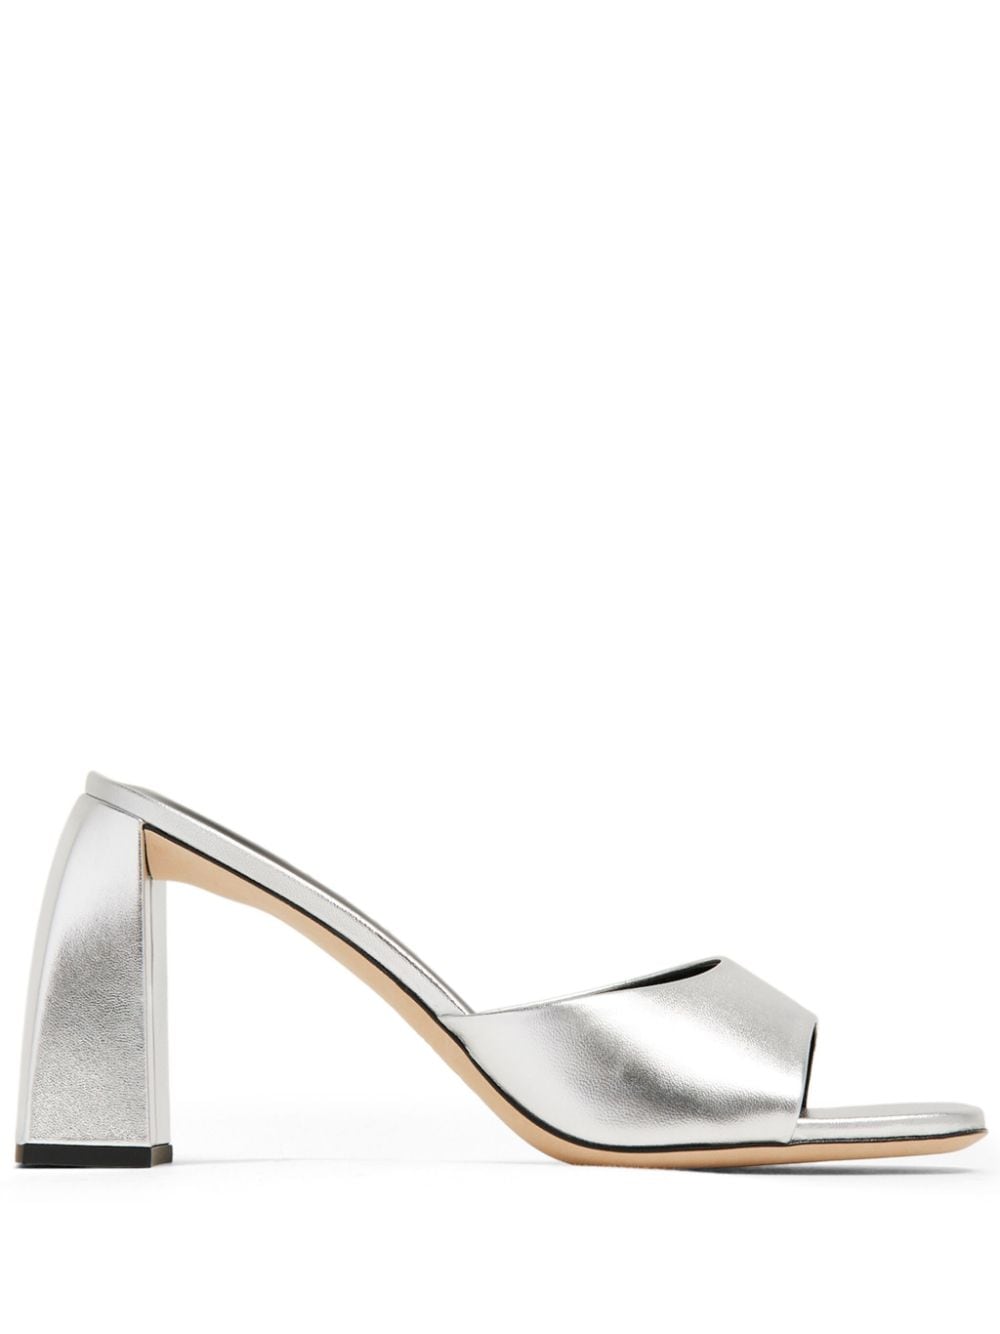 BY FAR Michele 100mm metallic leather mules - Argento